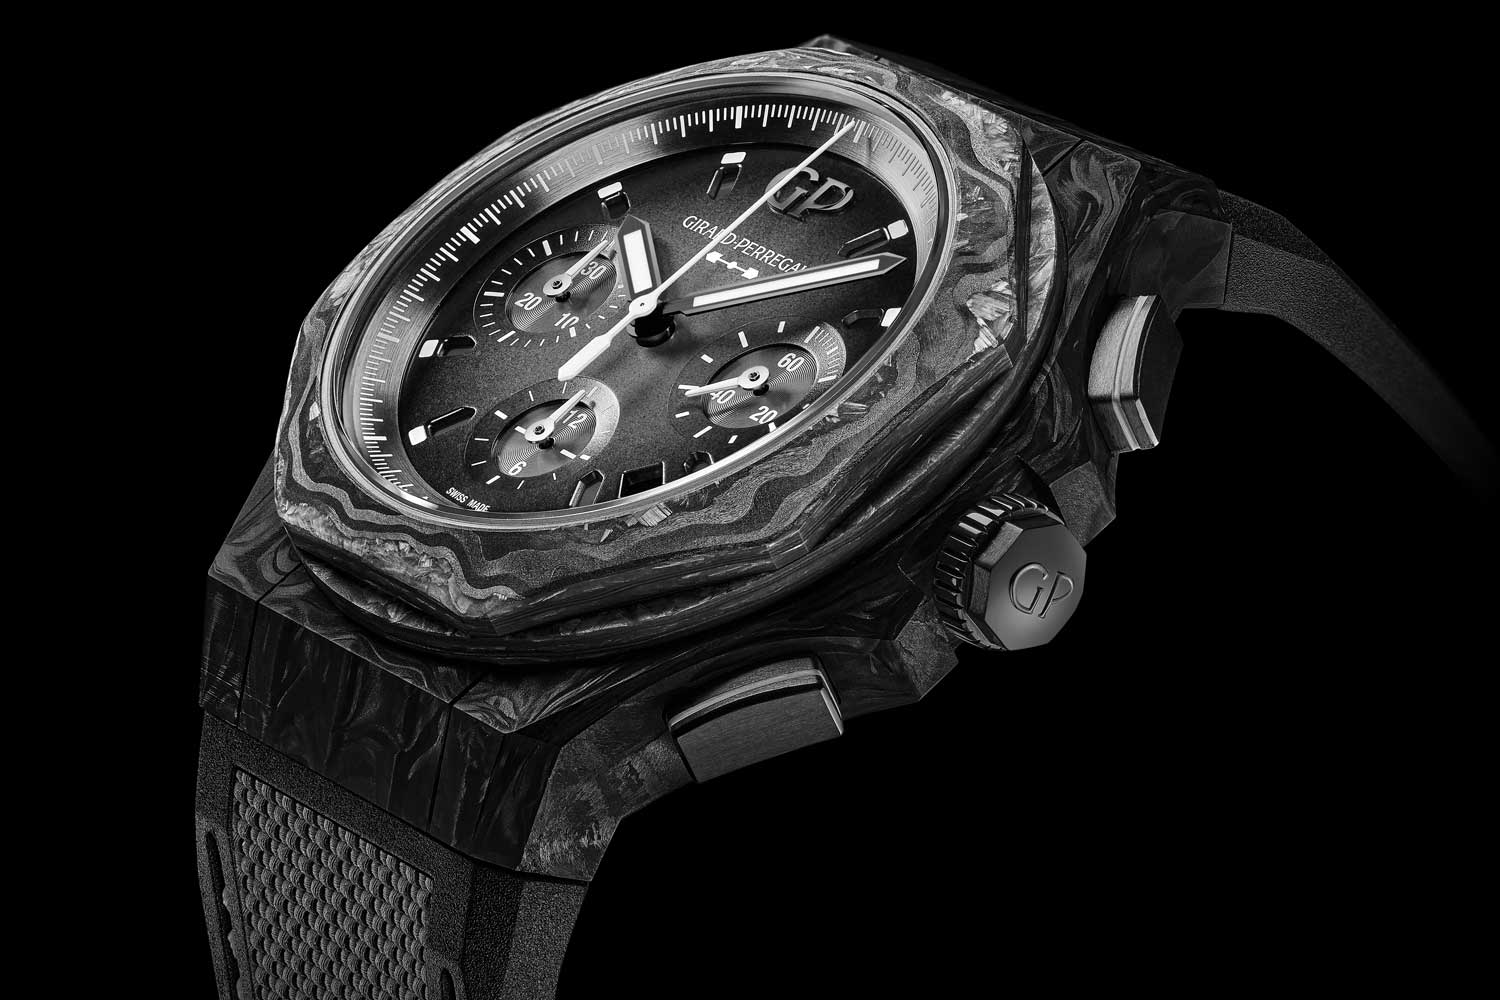 The Laureato Absolute Crystal Rock features a 44mm case in Carbon Glass, which is forged by combining layers of carbon fibre and fibreglass, which is subjected to high temperatures and pressure to form a homogenous material; the material can then be milled case form that has a matte, slightly textured finish; the constituent layers create uneven strata within the material and are randomly aligned, making the appearance of each case unique and every watch exclusive